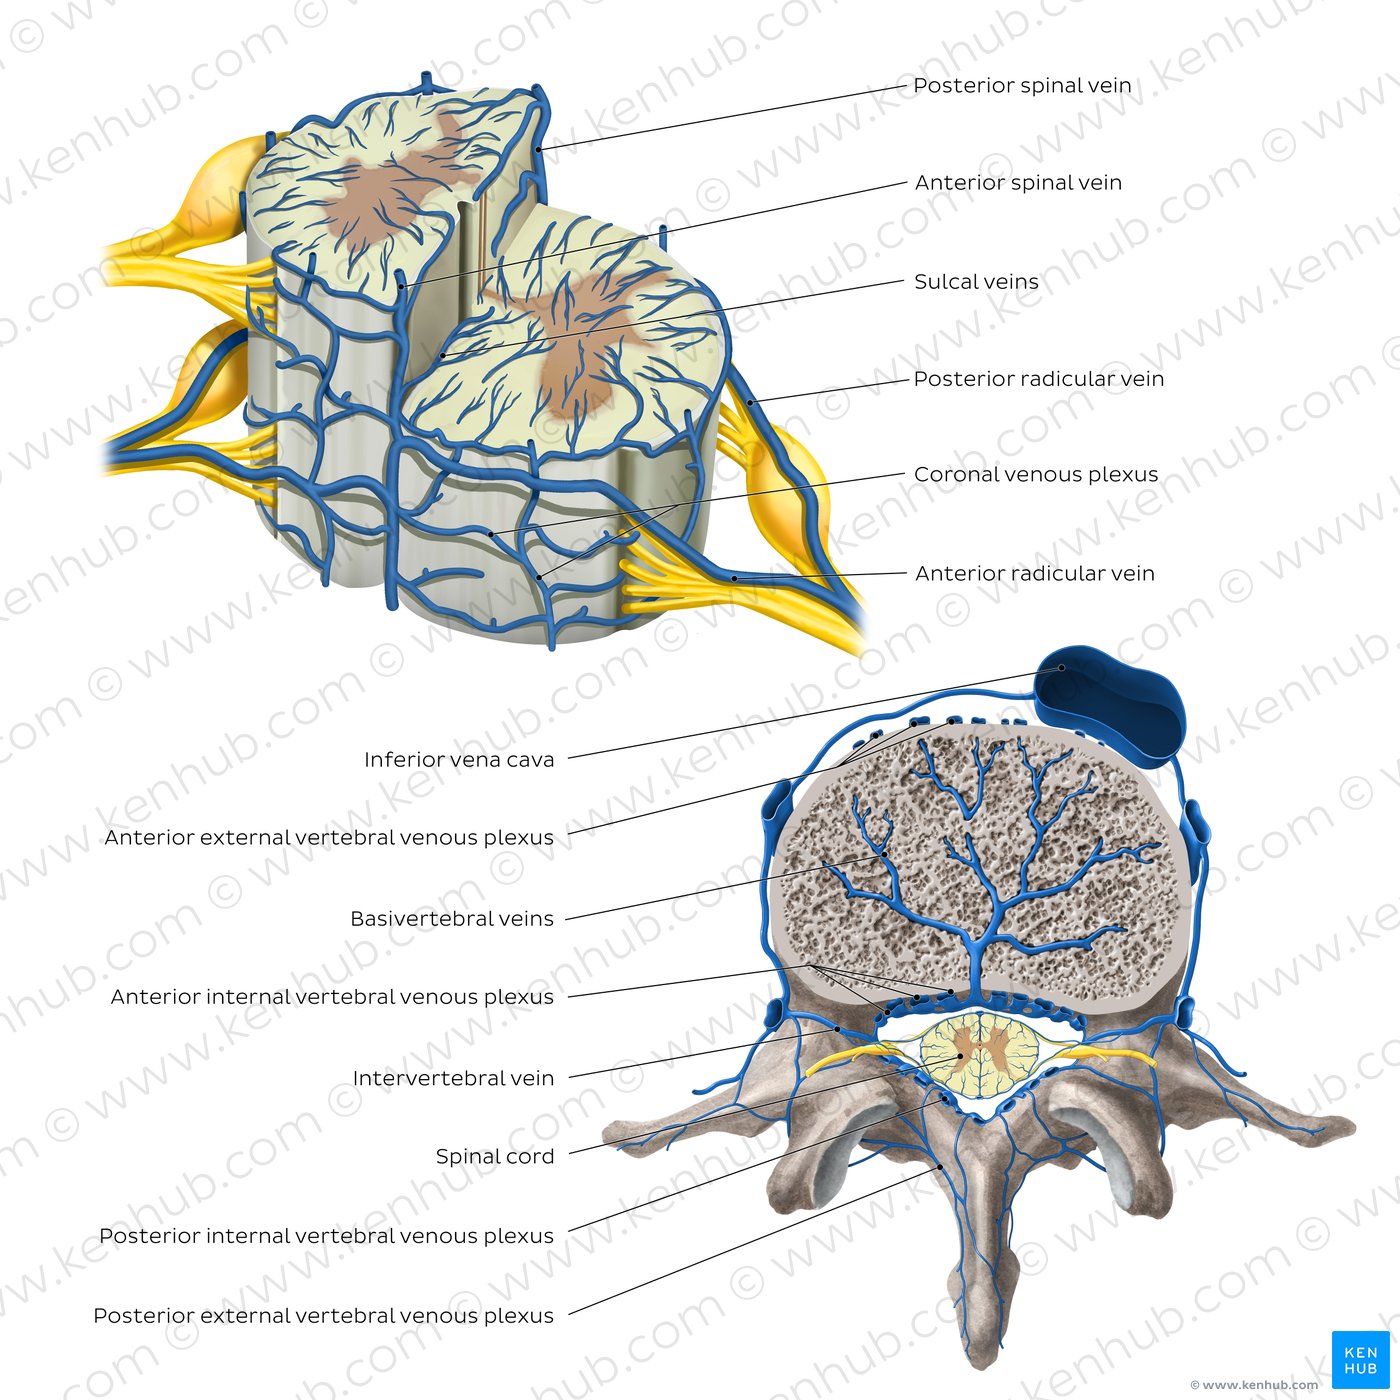 Spinal cord: Anatomy, structure, tracts and function | Kenhub